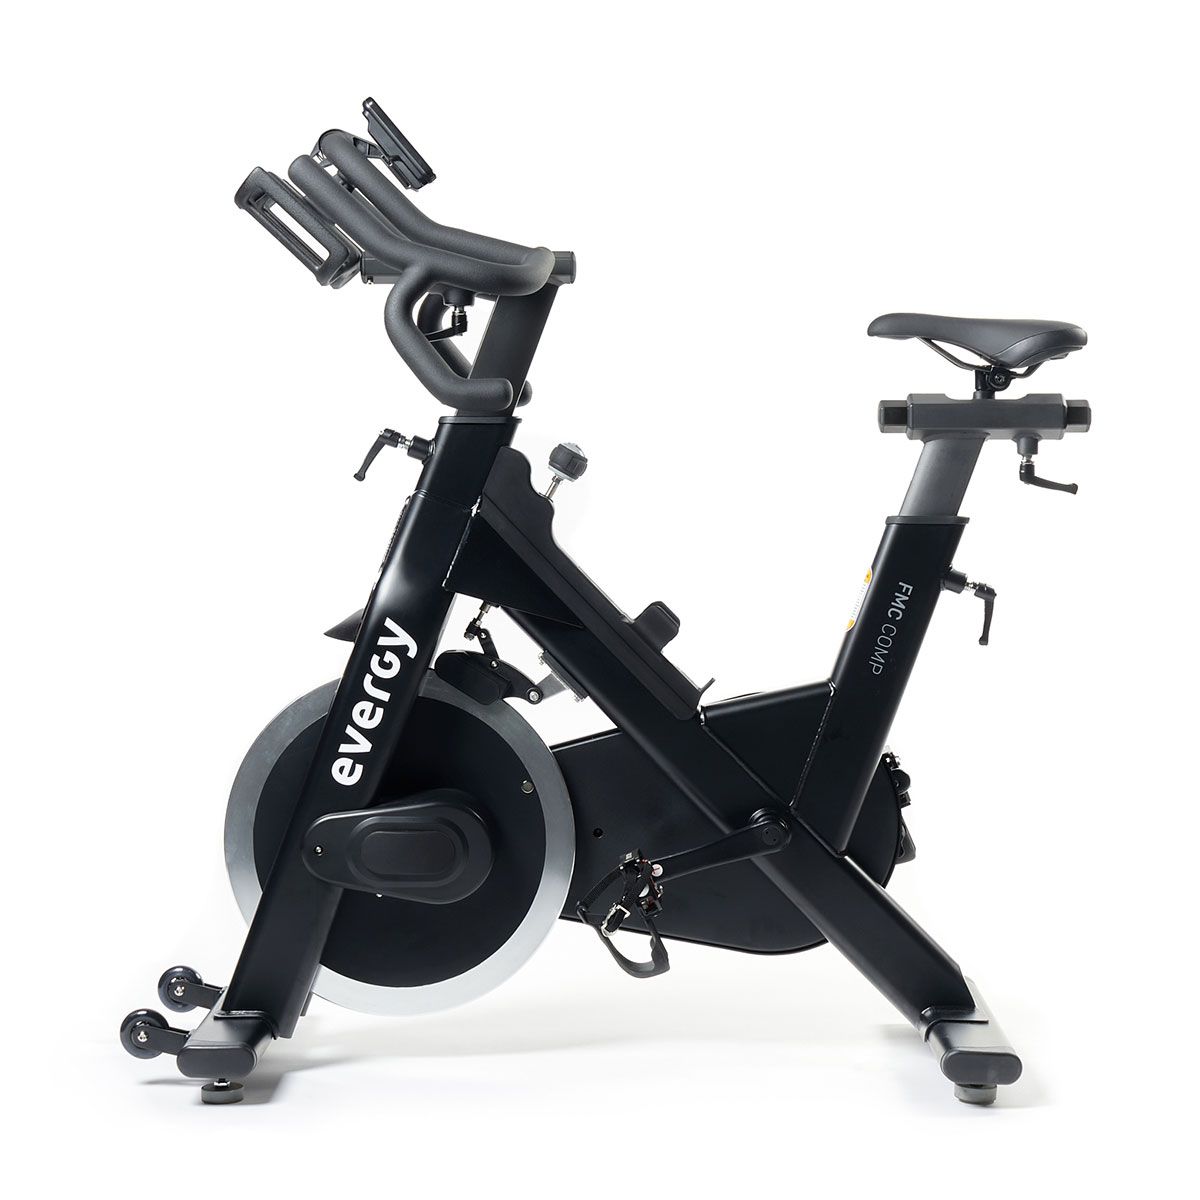 Bicicleta Spinning Indoor Cyclicng Fmc/comp - negro - 